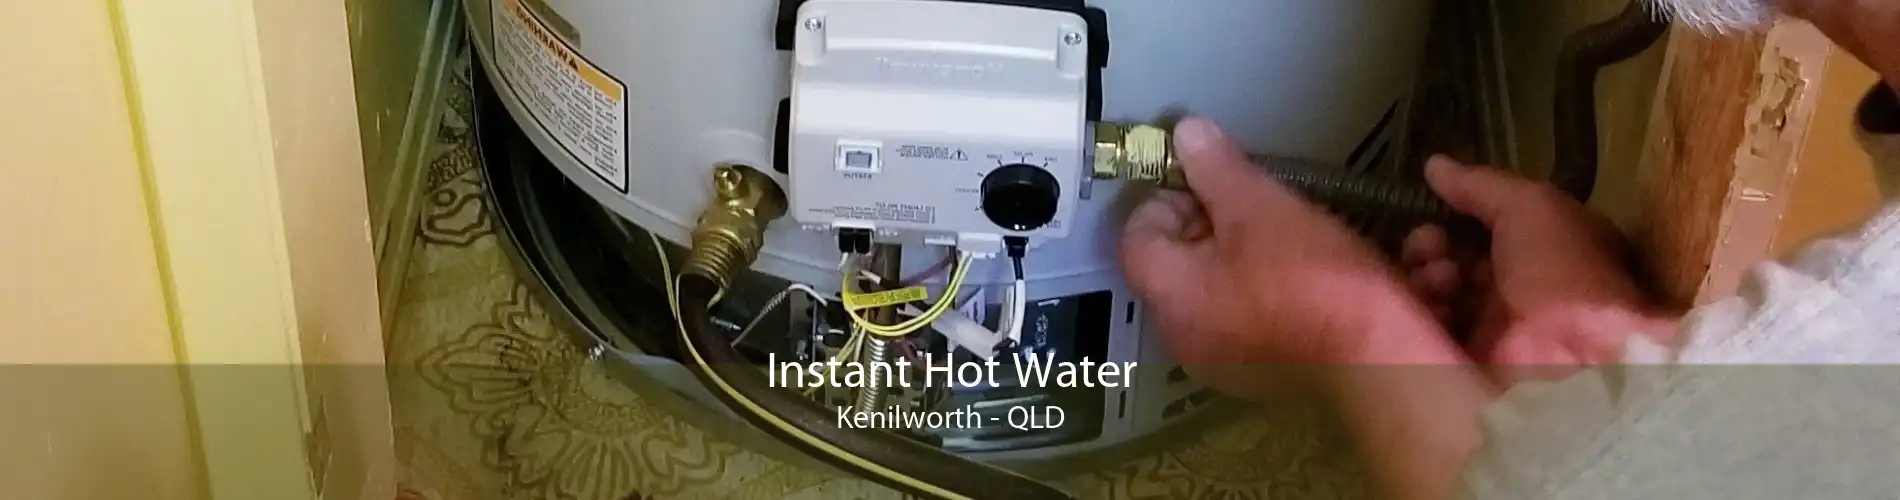 Instant Hot Water Kenilworth - QLD